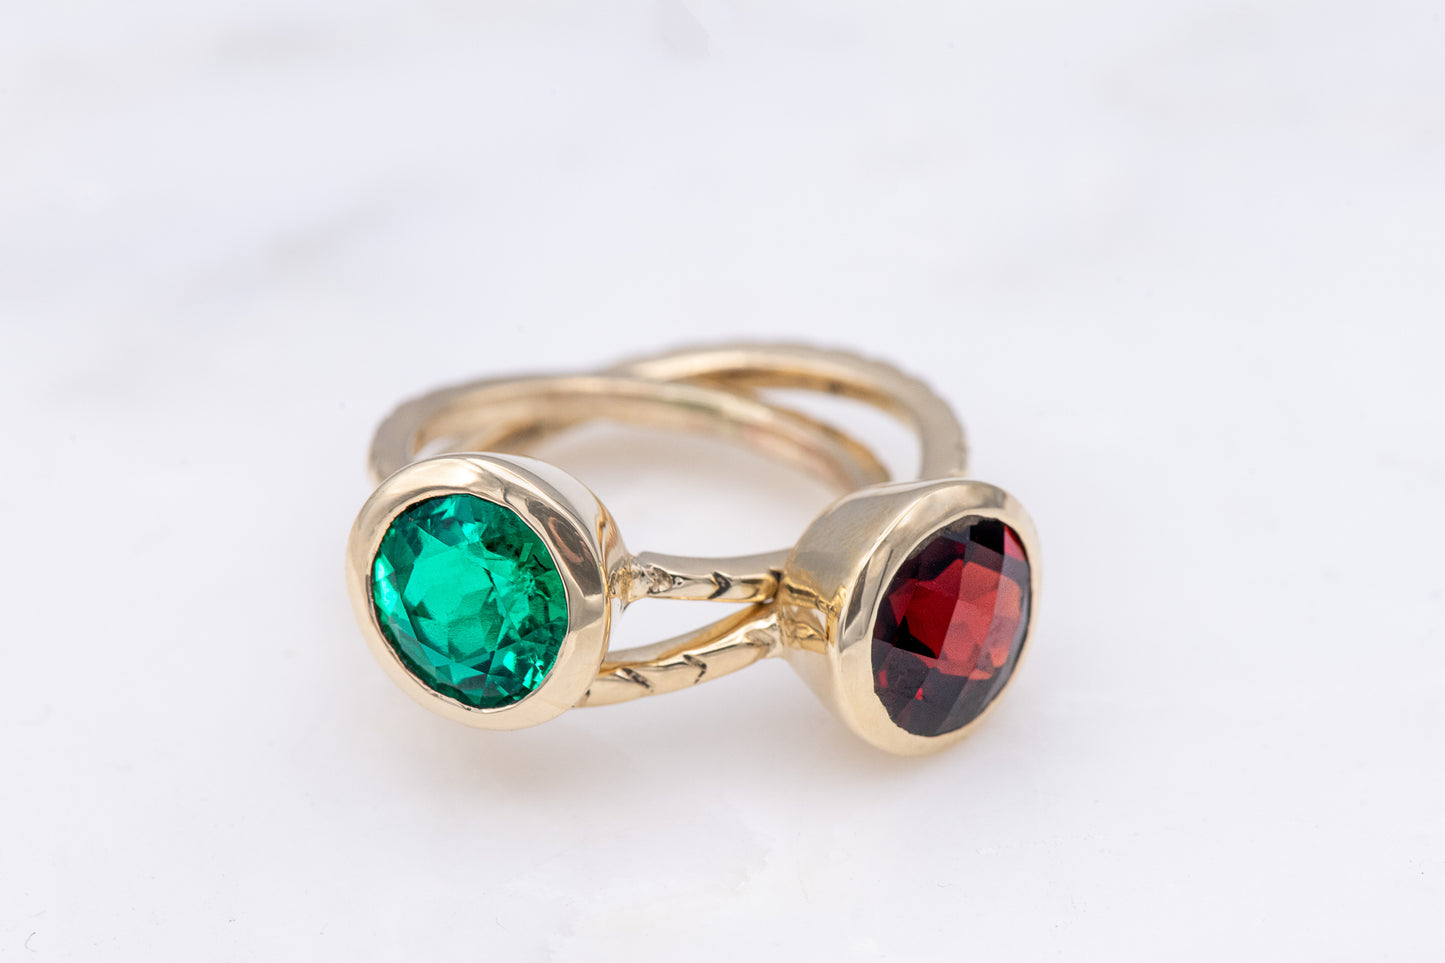 Handmade jewelry: A cassin emerald and yellow gold engagement ring with green and red stones.